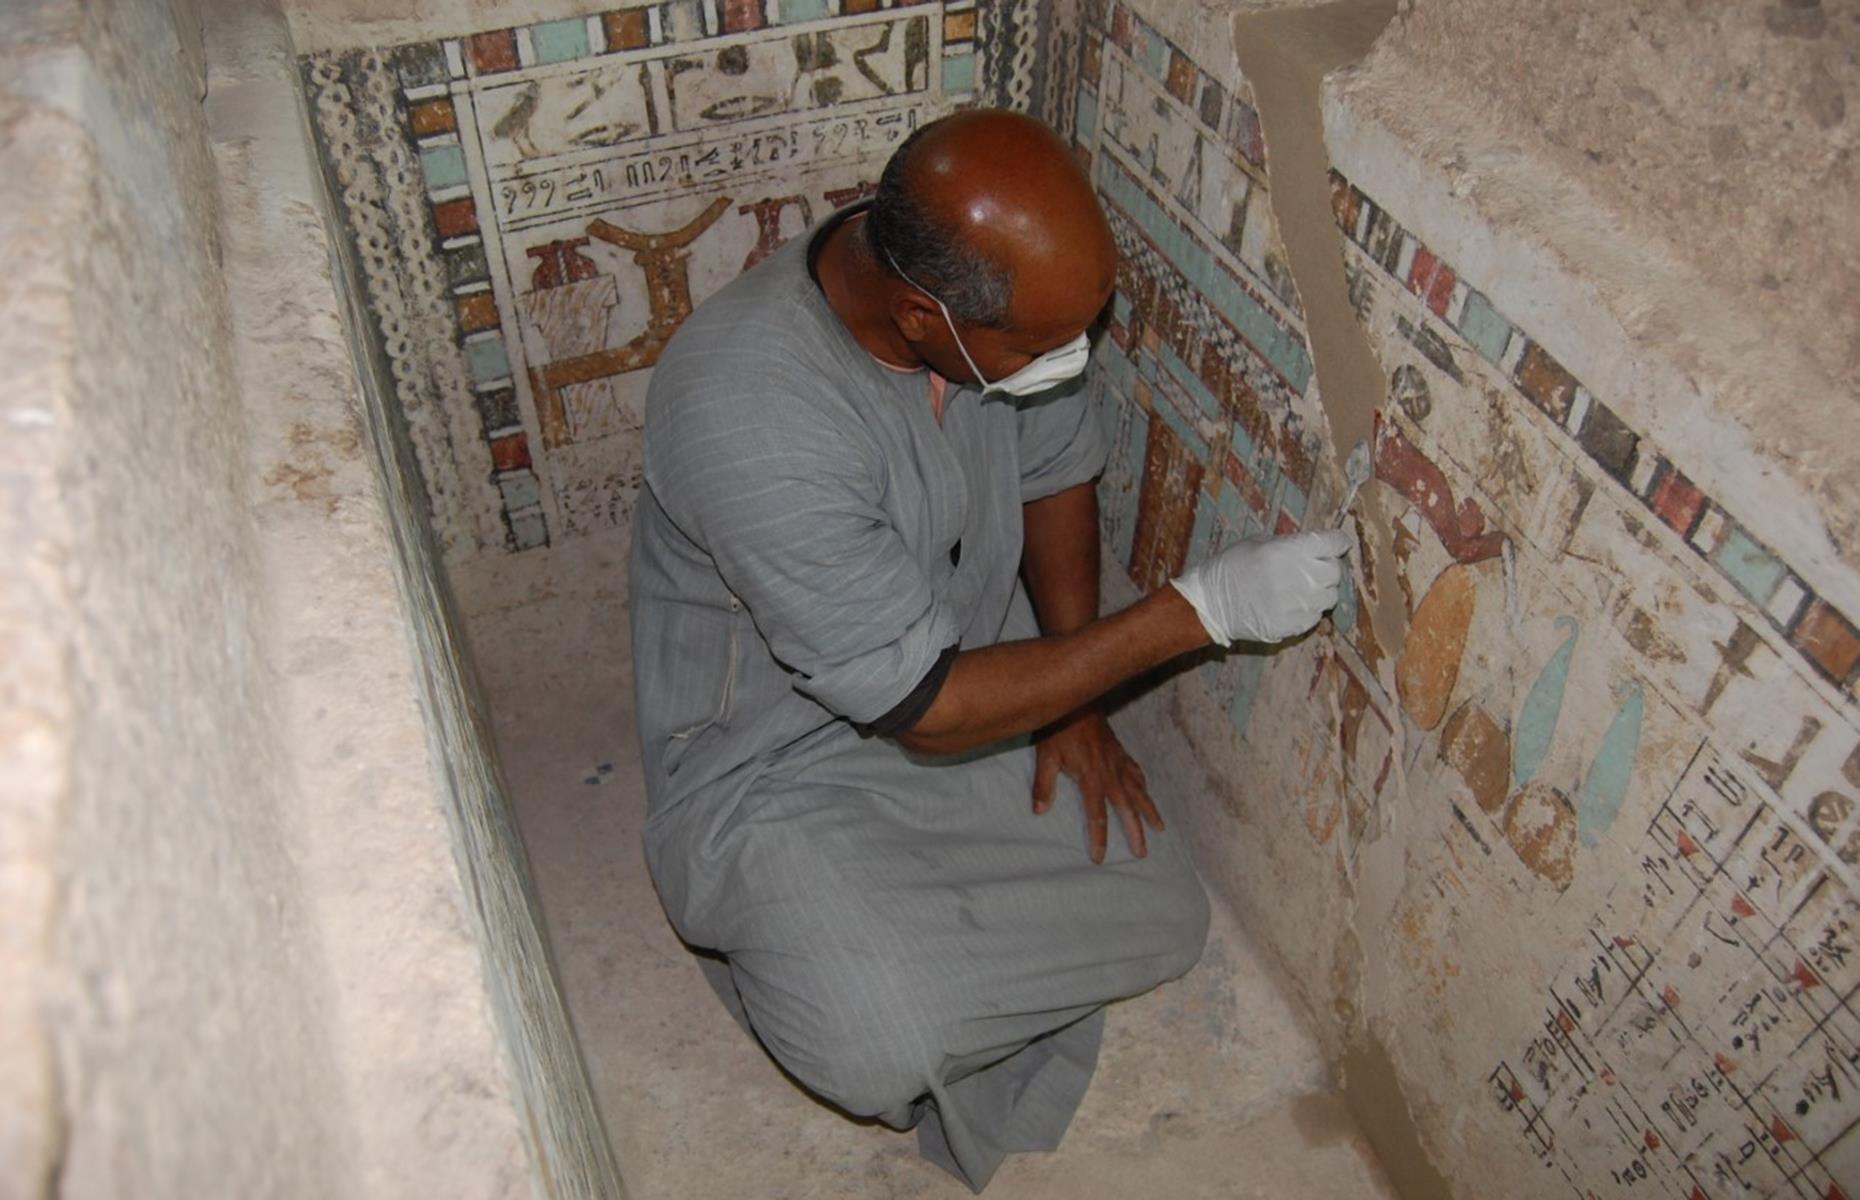 <p>Meru's tomb was recently restored by a joint team of archaeologists from the Egyptian Ministry of Antiquities and the University of Warsaw, Poland. However, it's not the first time the tomb has been touched: in 1996, some of the wall paintings were restored by an Italian team. The wall paintings in this tomb are especially significant, because the technique of painting directly onto lime plaster is rather unusual.</p>